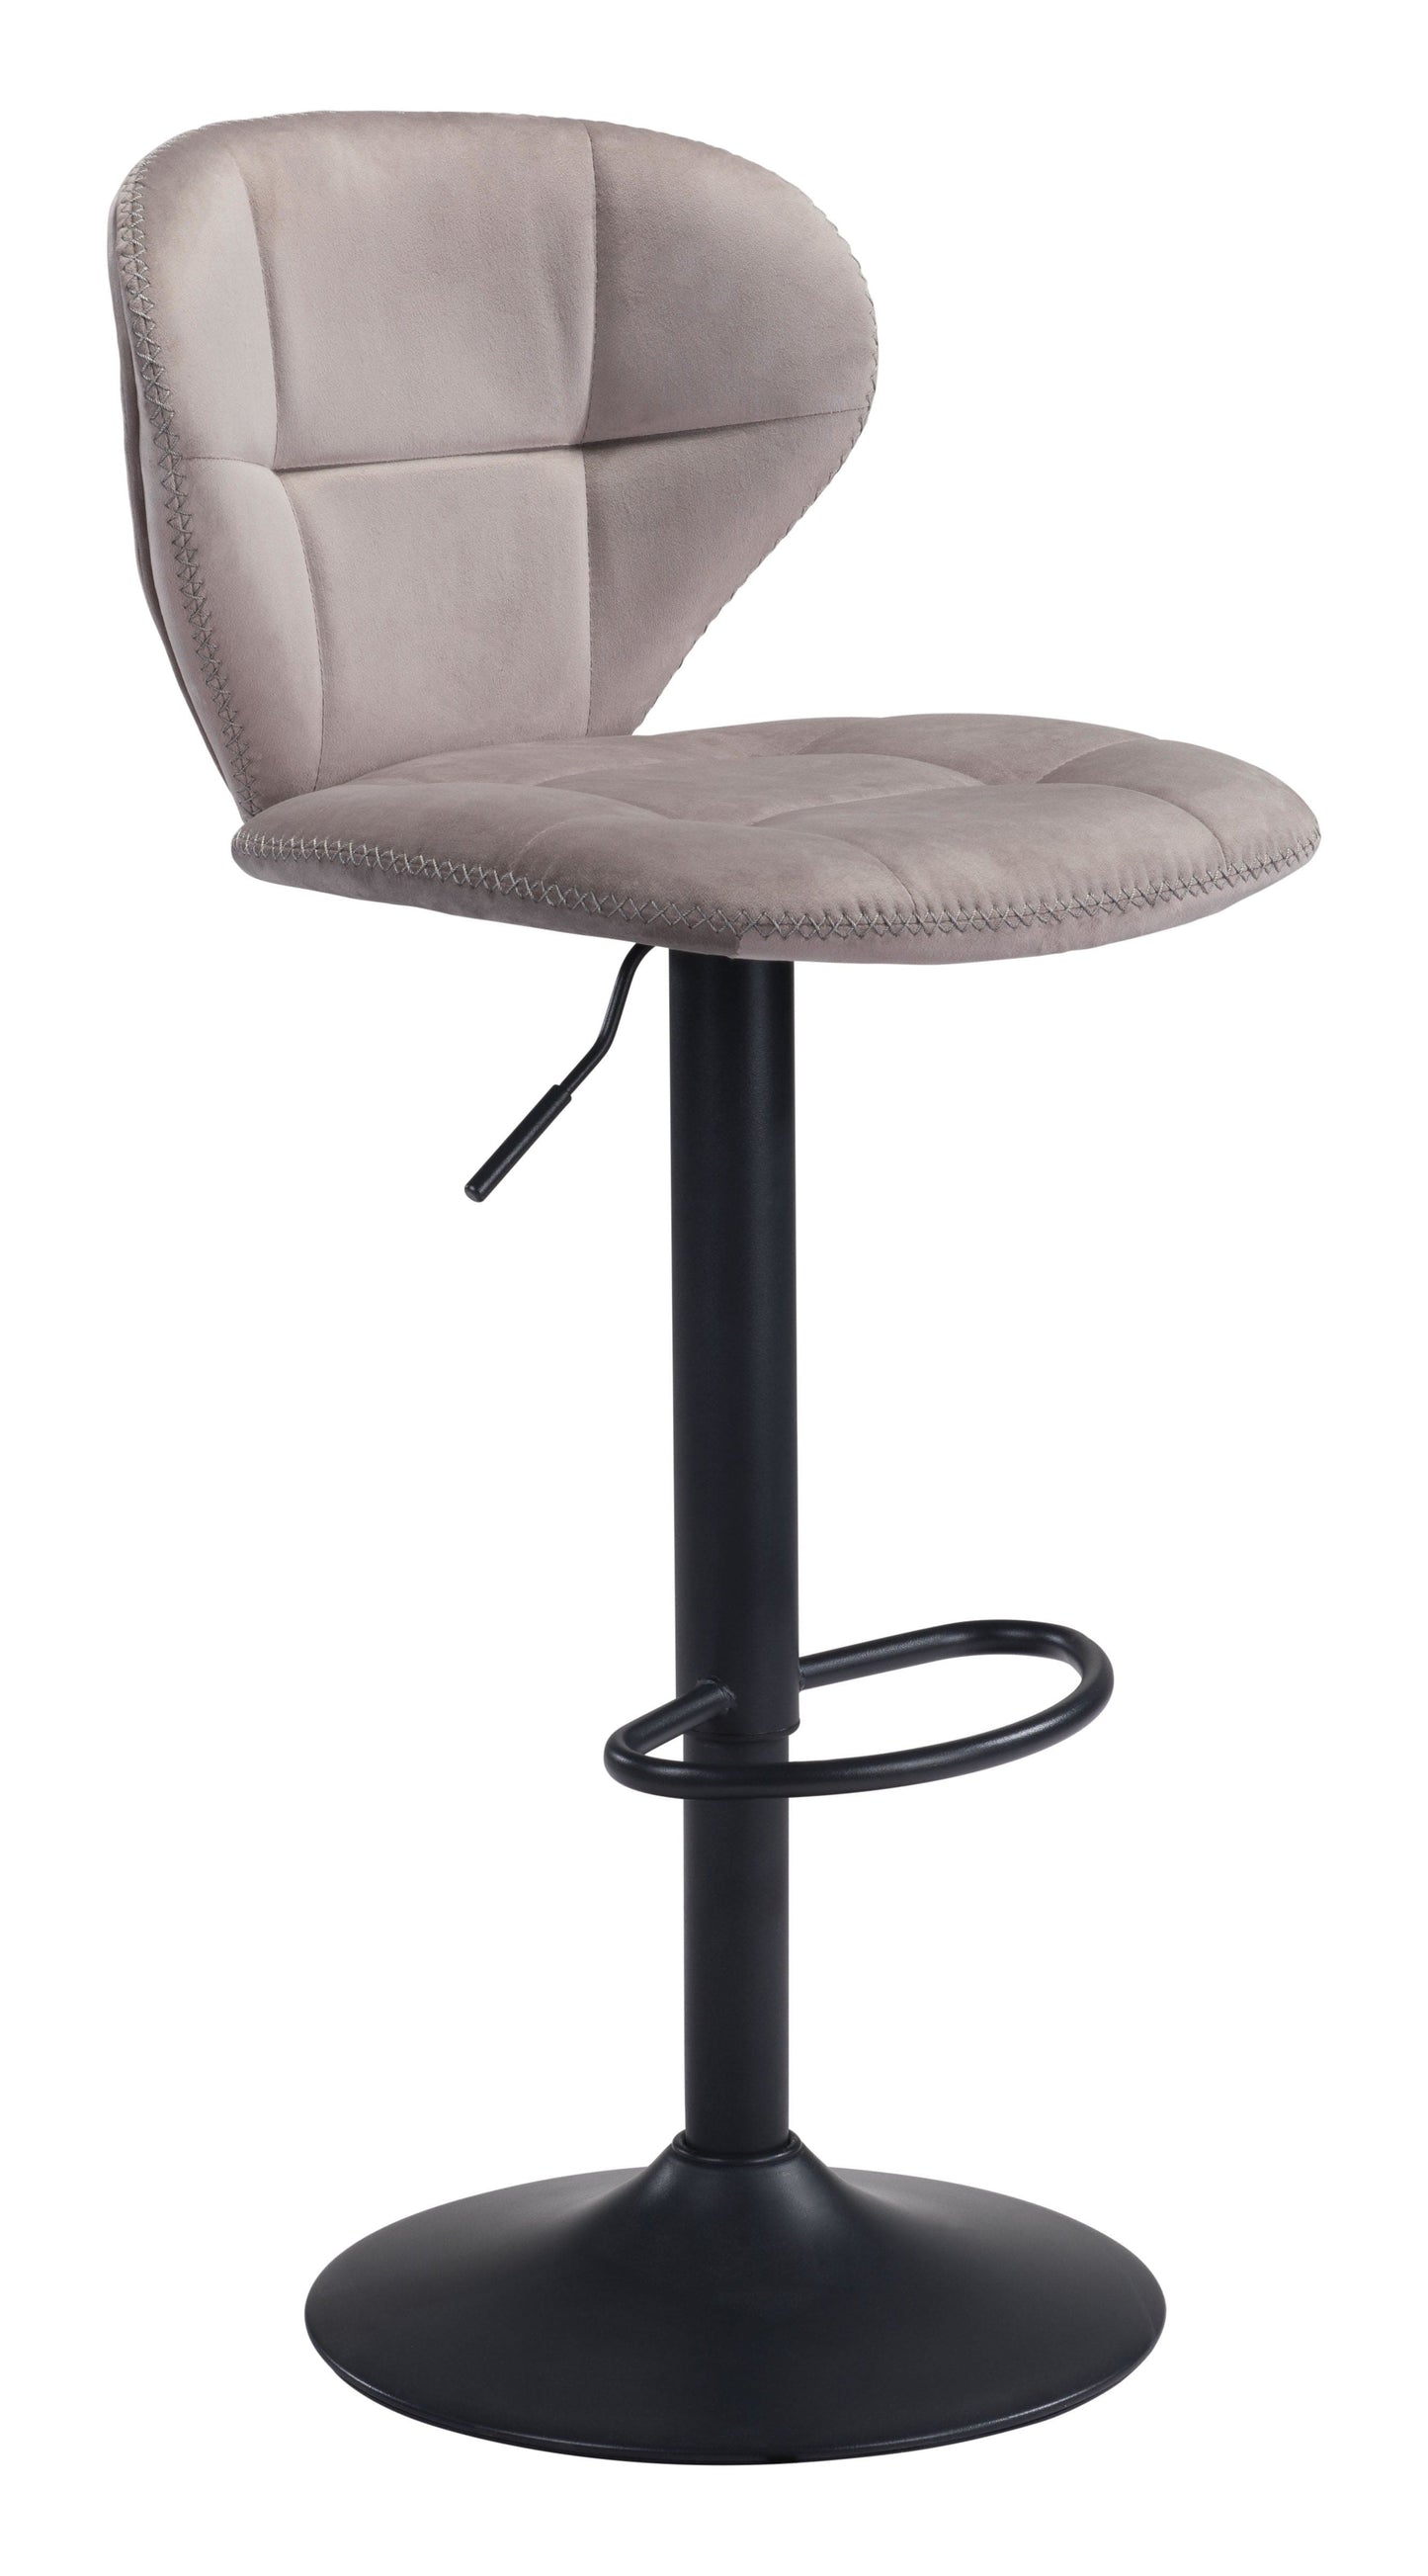 Height Adjustable, Commercial Grade Bar Chair